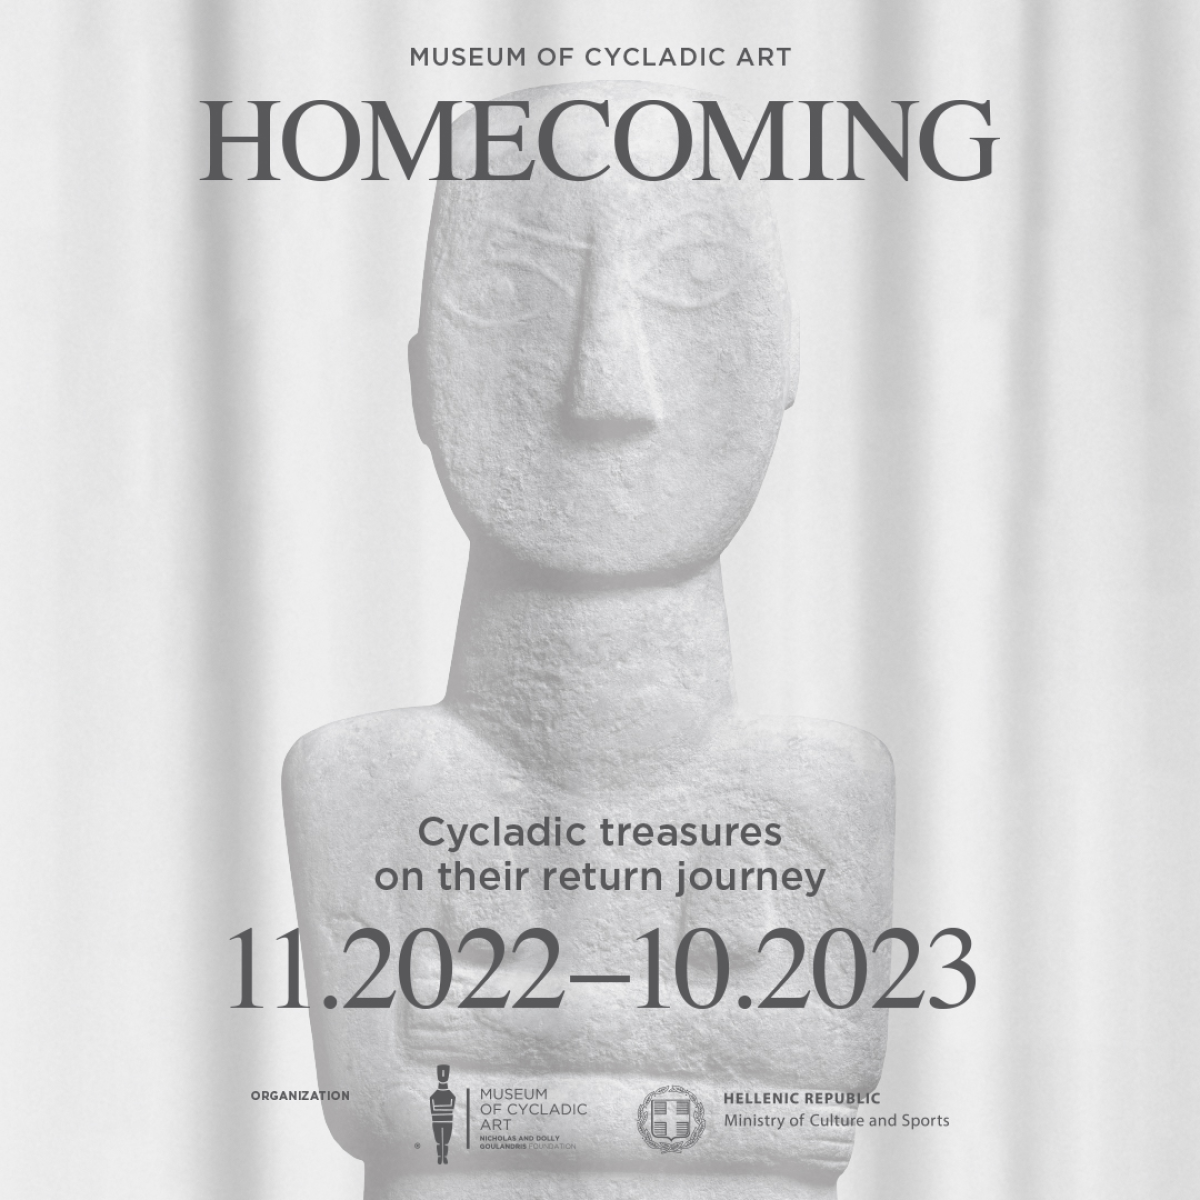 Homecoming? Poster of the exhibition at the Museum of Cycladic Art in Athens.